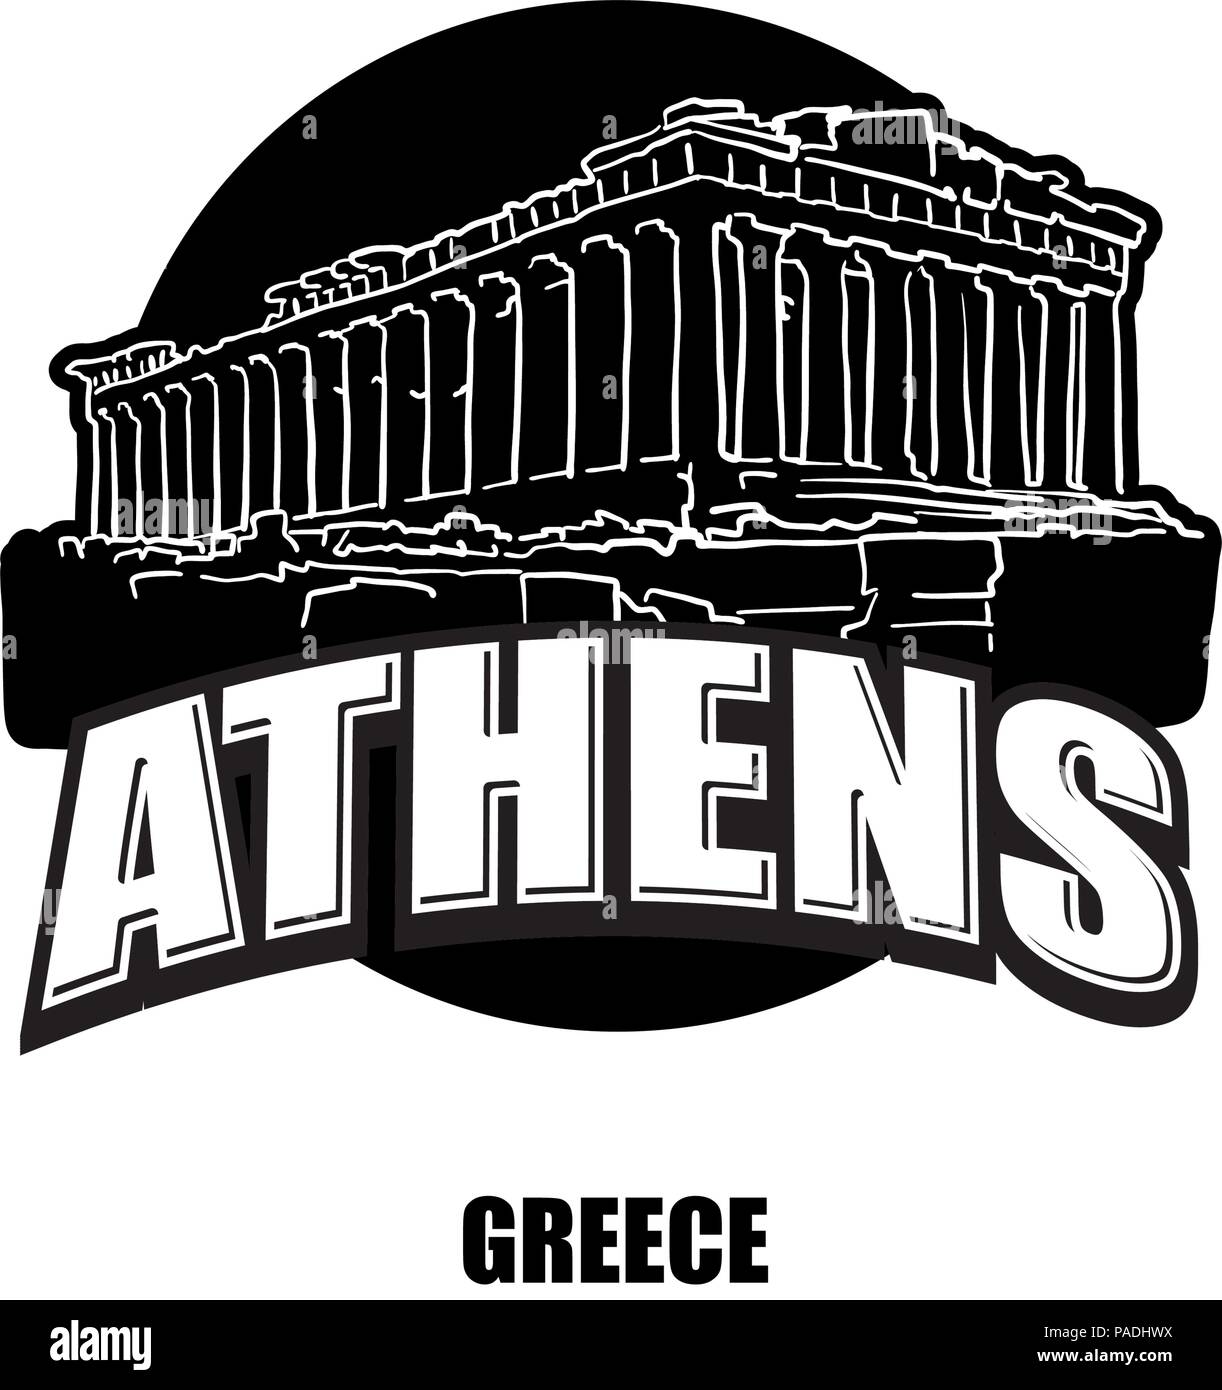 Athens, temple, black and white logo for high quality prints. Hand drawn vector sketch. Stock Vector